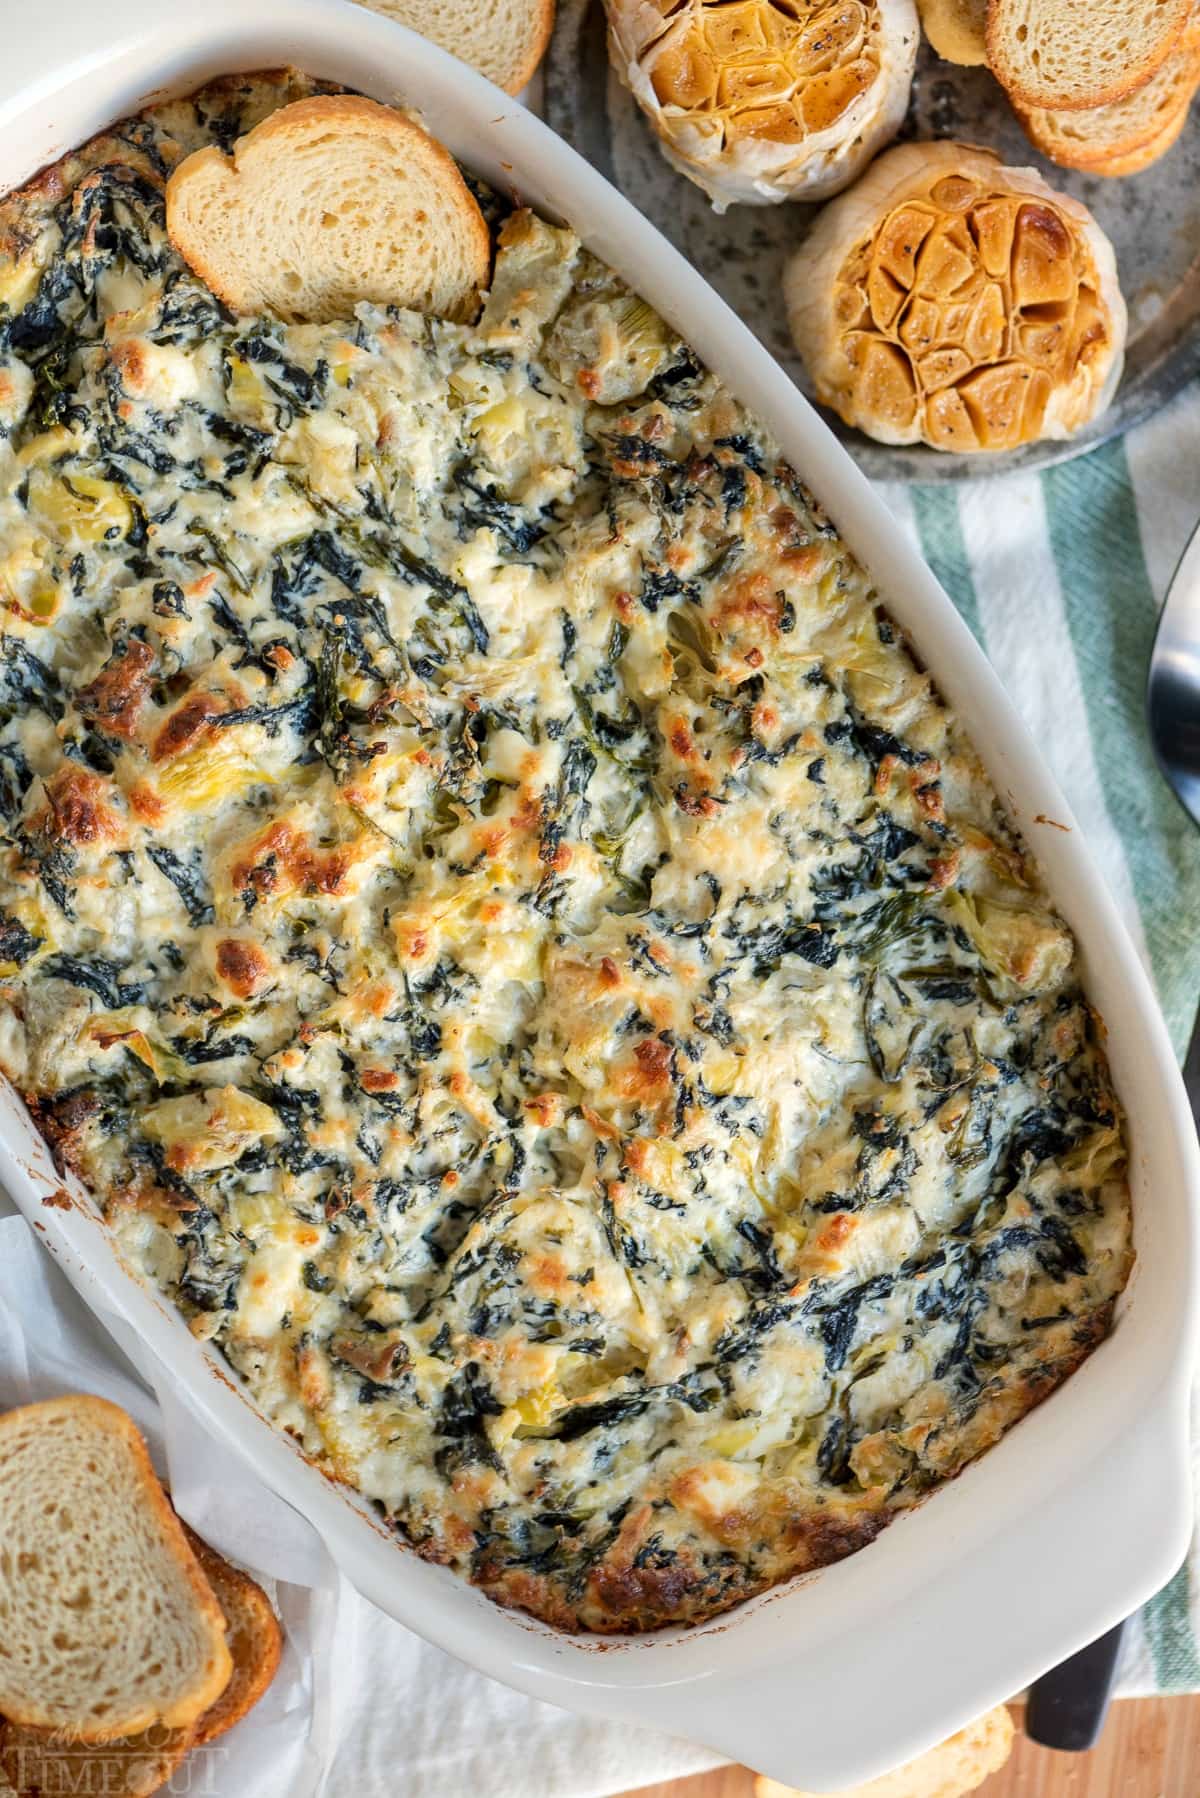 https://www.momontimeout.com/wp-content/uploads/2018/02/spinach-artichoke-dip-with-roasted-garlic.jpg